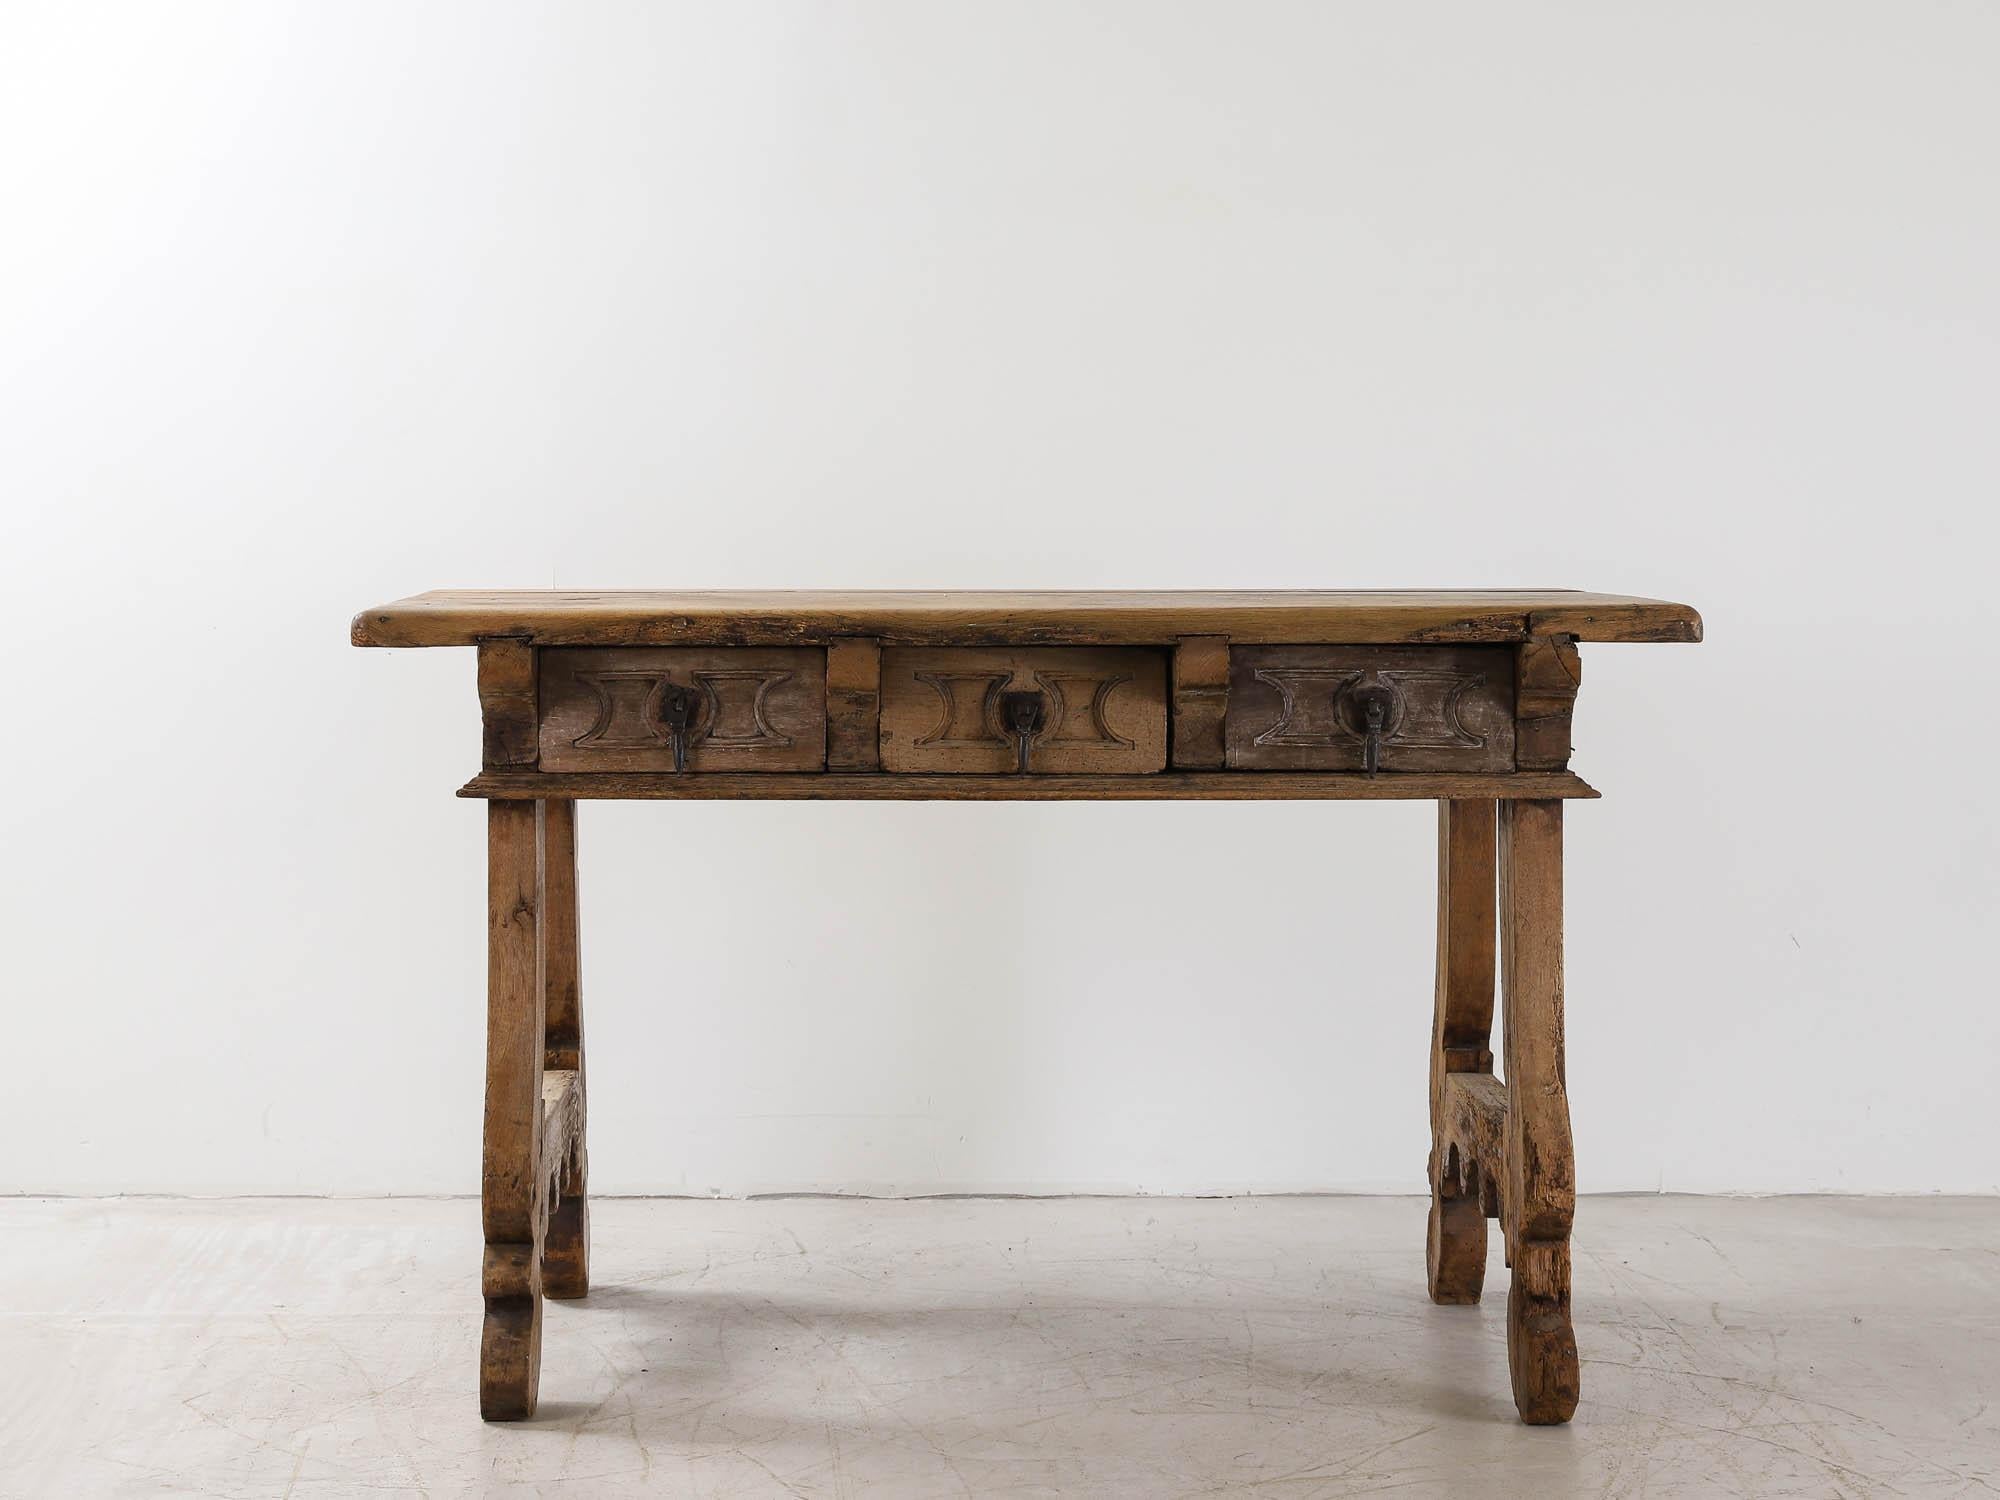 An 18th Century Spanish carved walnut table. With a thick, honey coloured, patinated top sitting on a three carved drawer frieze with original iron pulls, supported by trestle lyre legs.